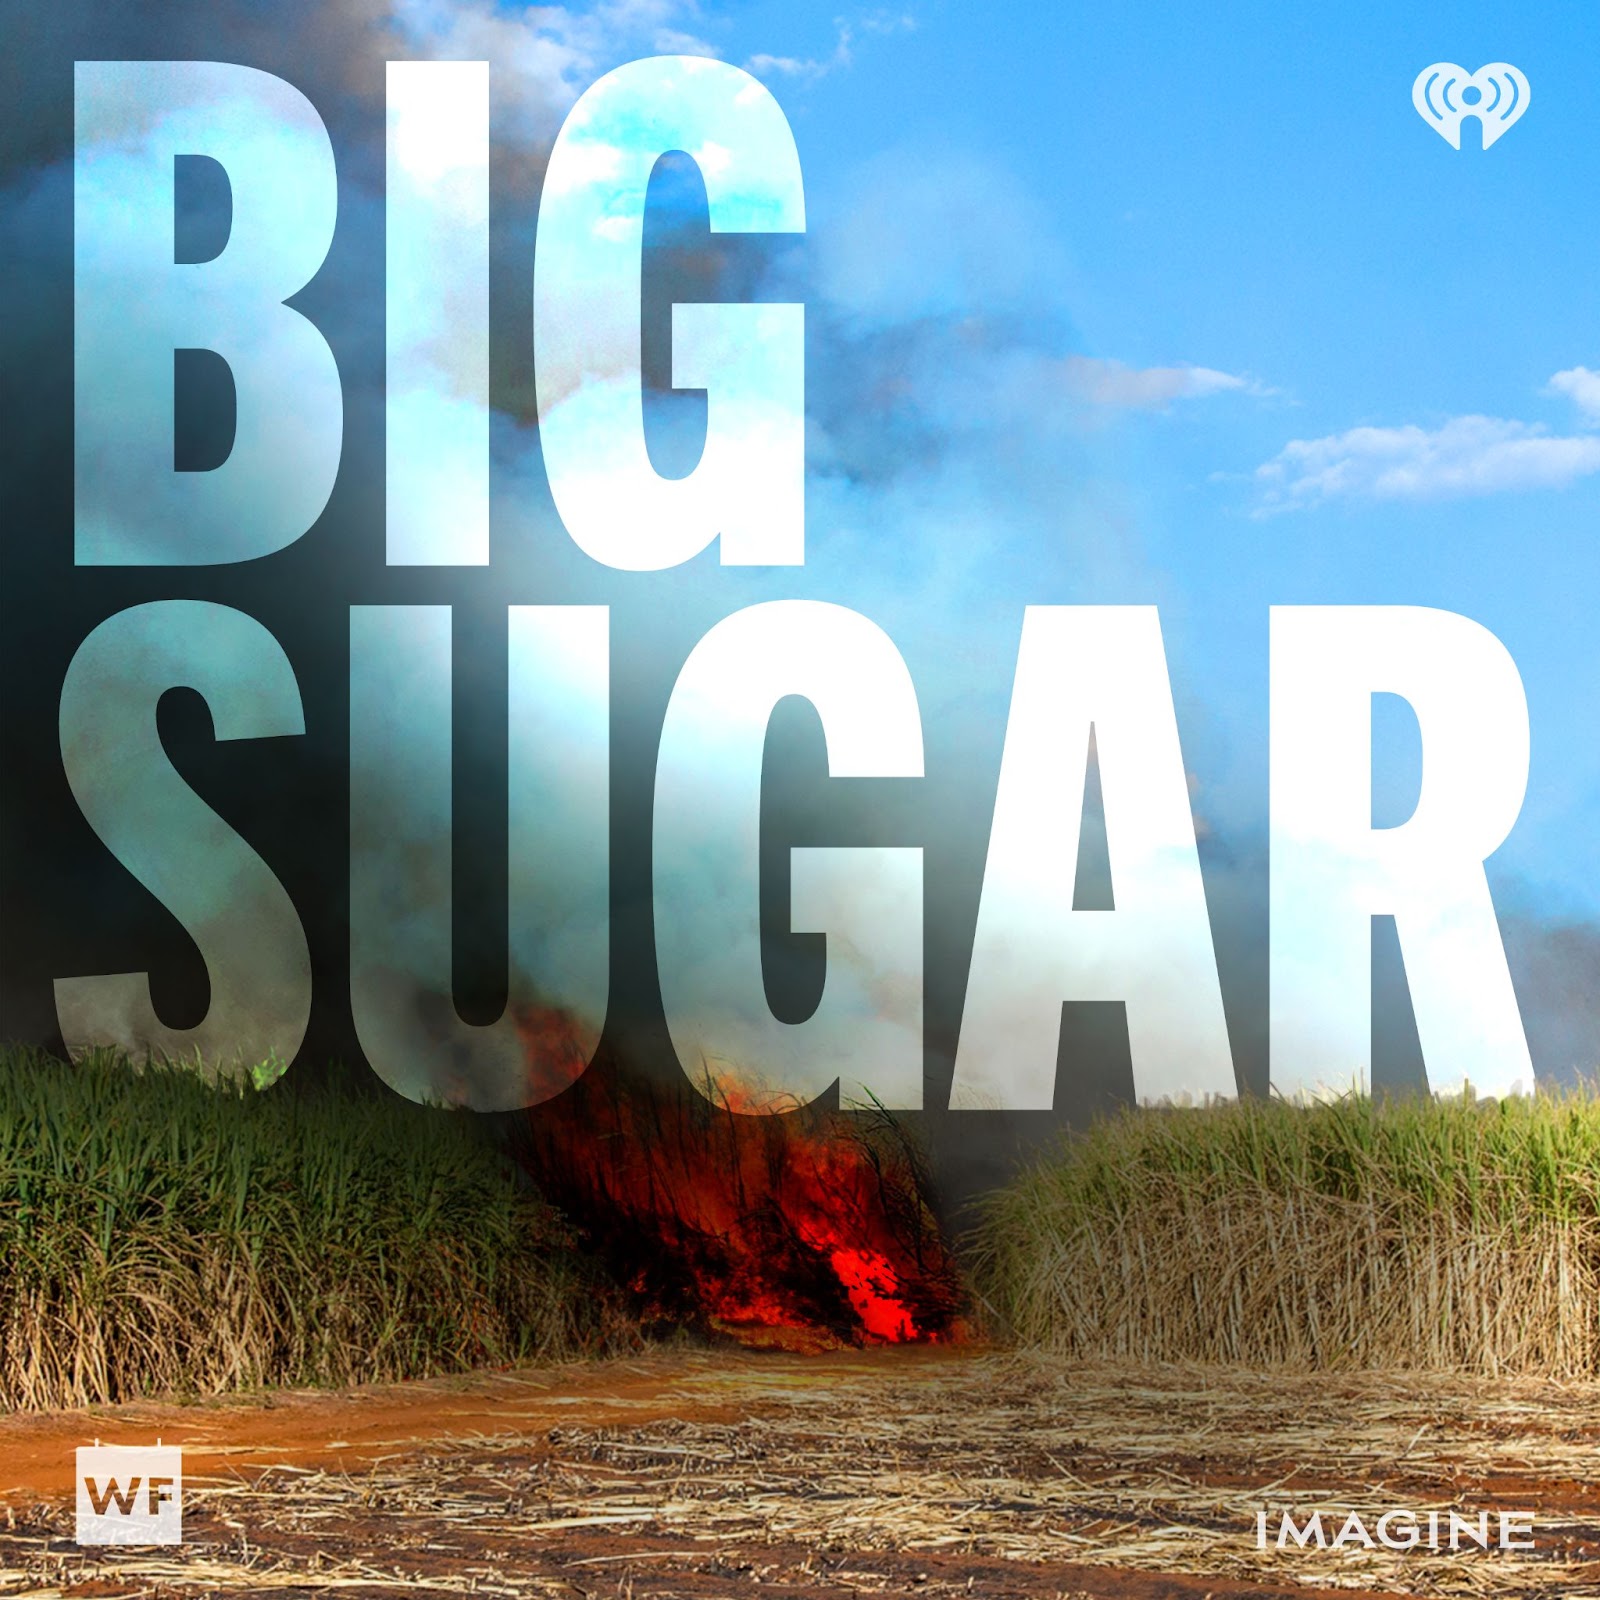  ‘Big Sugar’ Podcast Reports On Battle Between Sugar Industry And Migrant Laborers